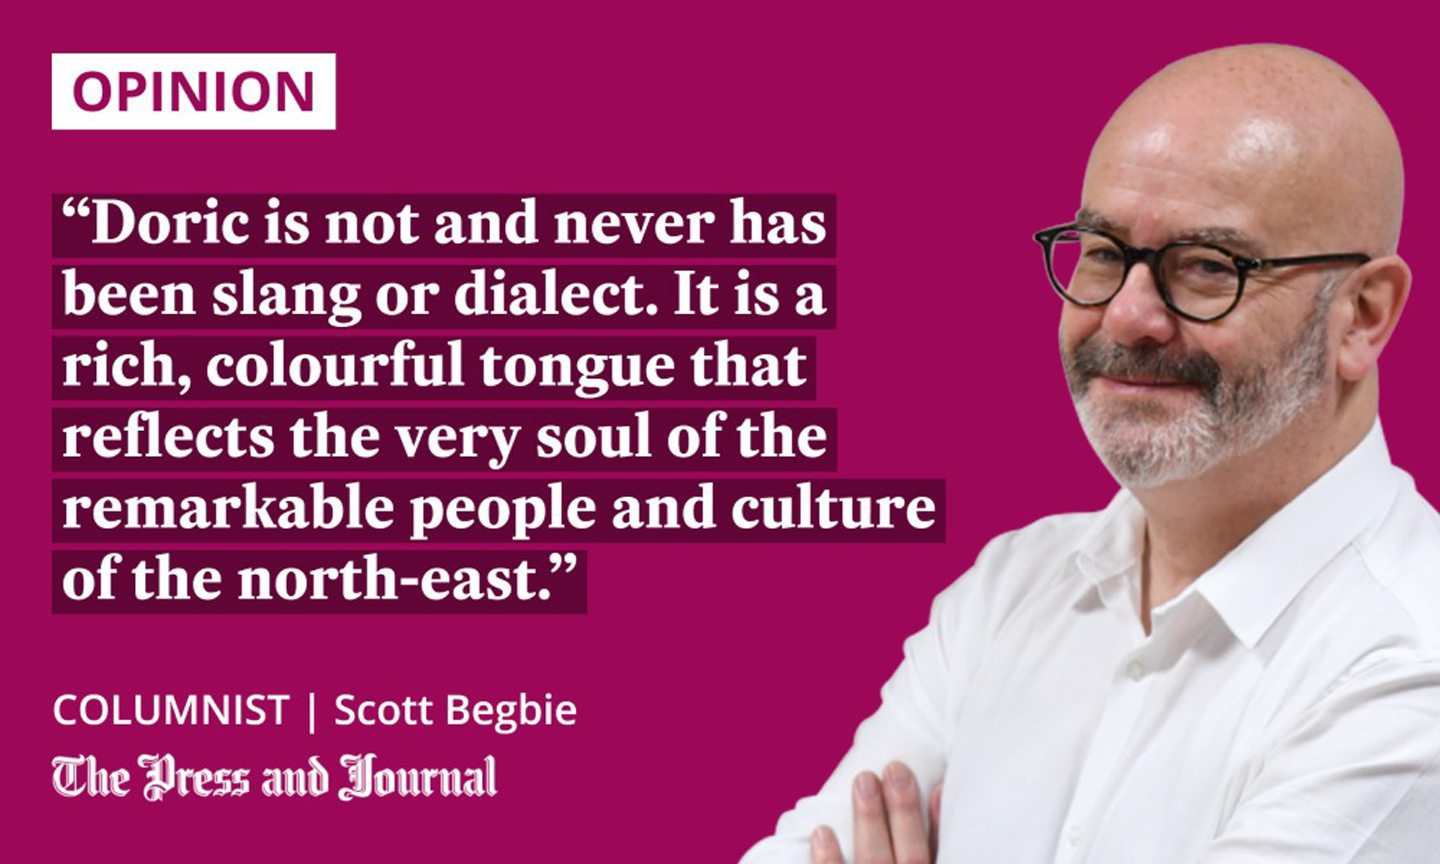 Columnist, Scott Begbie, speak about doric: "Doric is not and never has been slang or dialect. It is a rich, colourful tongue that reflects the very soul of the remarkable people and culture of the north-east."